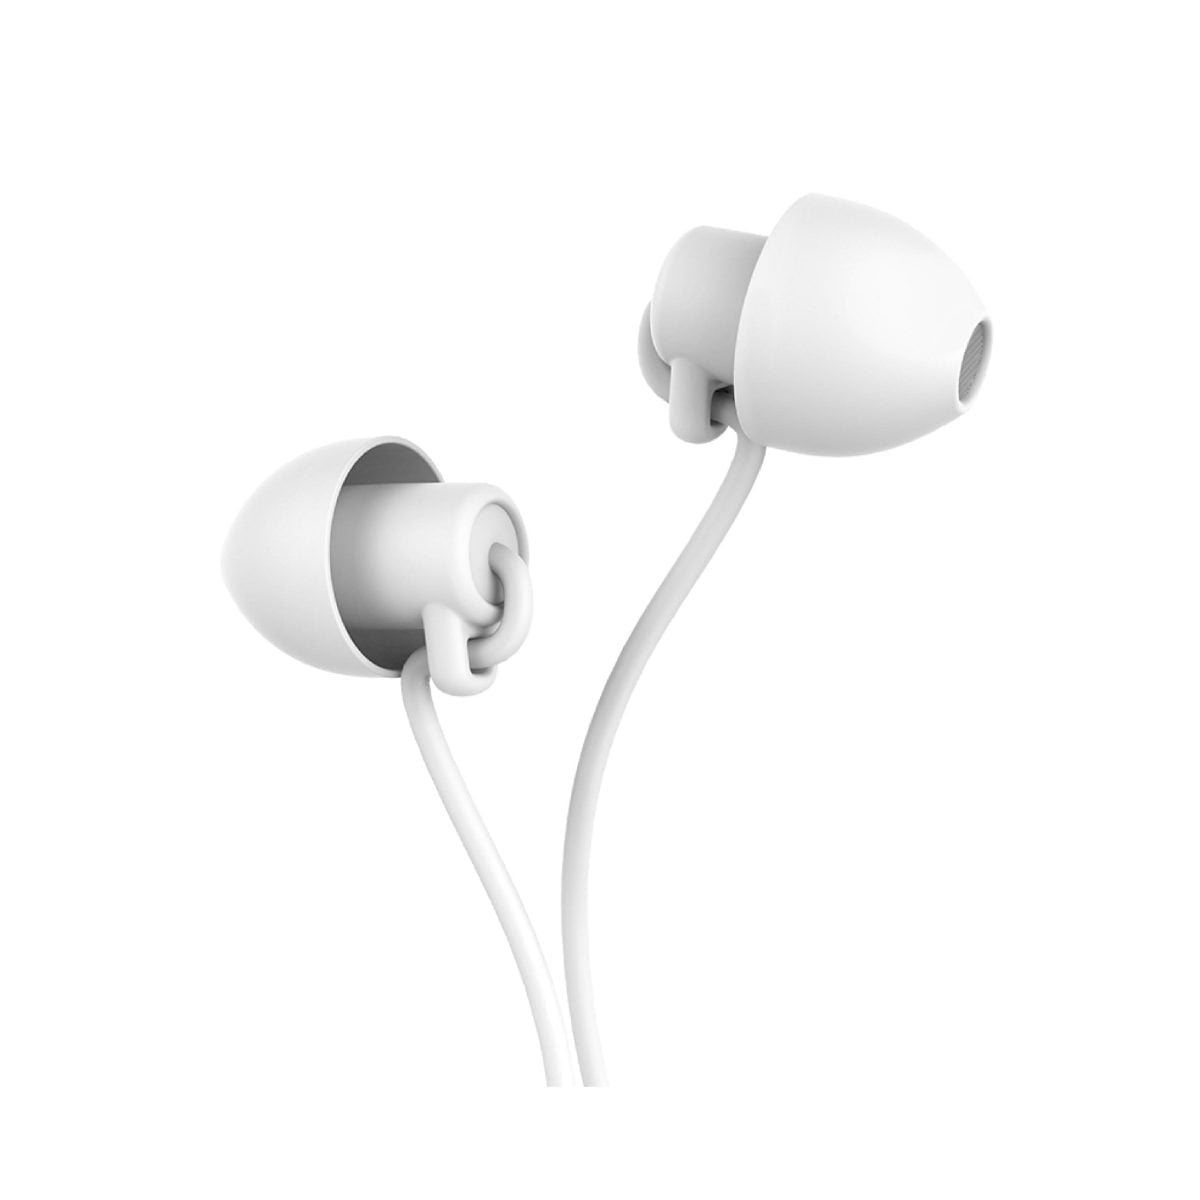 Earphone98 03 Scaled Hoco Material: Silica Gel, Tpe Enameled Wire Length: 1.2M, Weight: 10G Speaker: 6Mm Connector: 3.5Mm Microphone: With A Wheat Controller Wire Control: Single Button Control Silicone Material, Soft And Does Not Oppress The Ear, Suitable For Sleeping Silicon Sleep Earphones M56 Earphone Wired Headphones With Mic - Black Silicon Sleep Earphones M56 Earphone Wired Headphones With Mic - Black